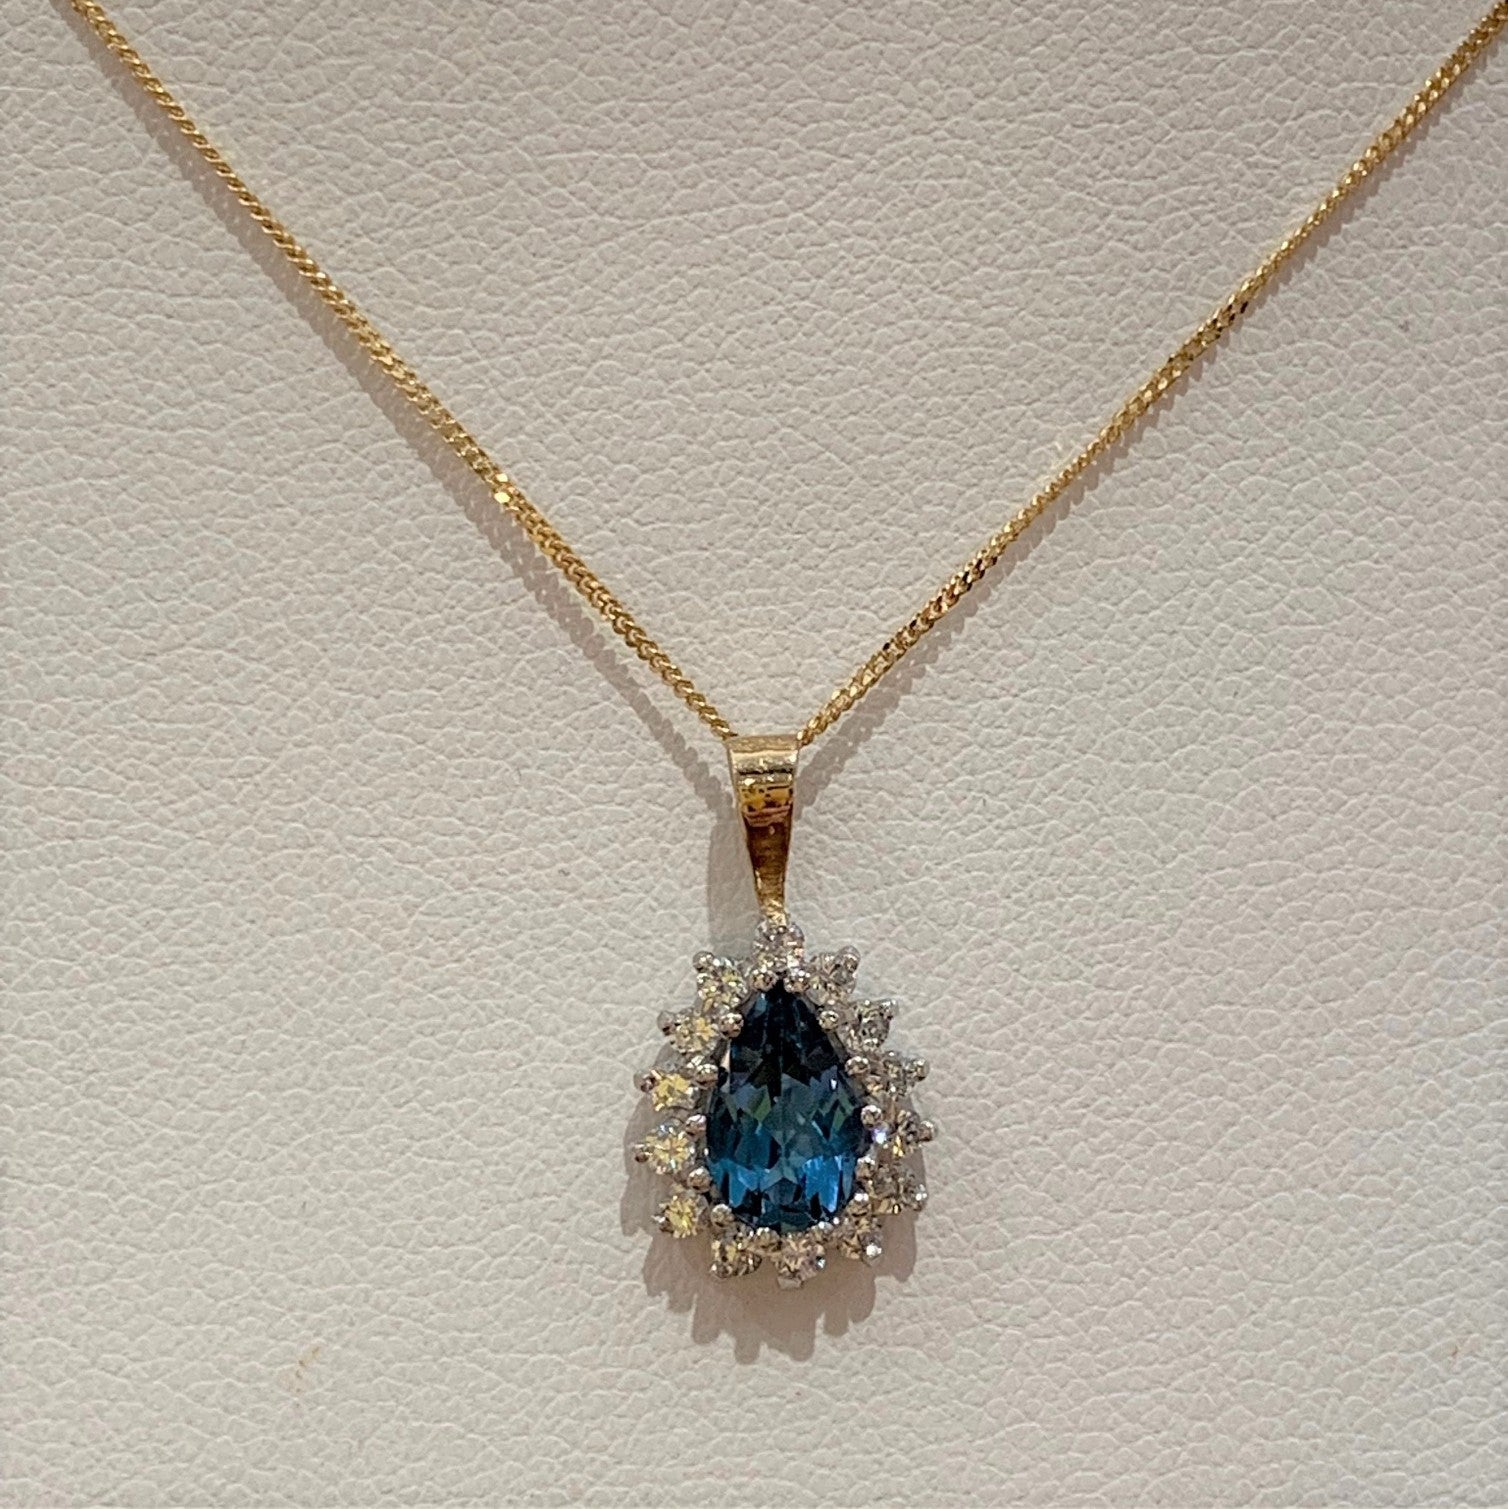 9ct Gold, Diamond and Pear Shaped Blue Topaz Necklace - Fotheringham Gallery